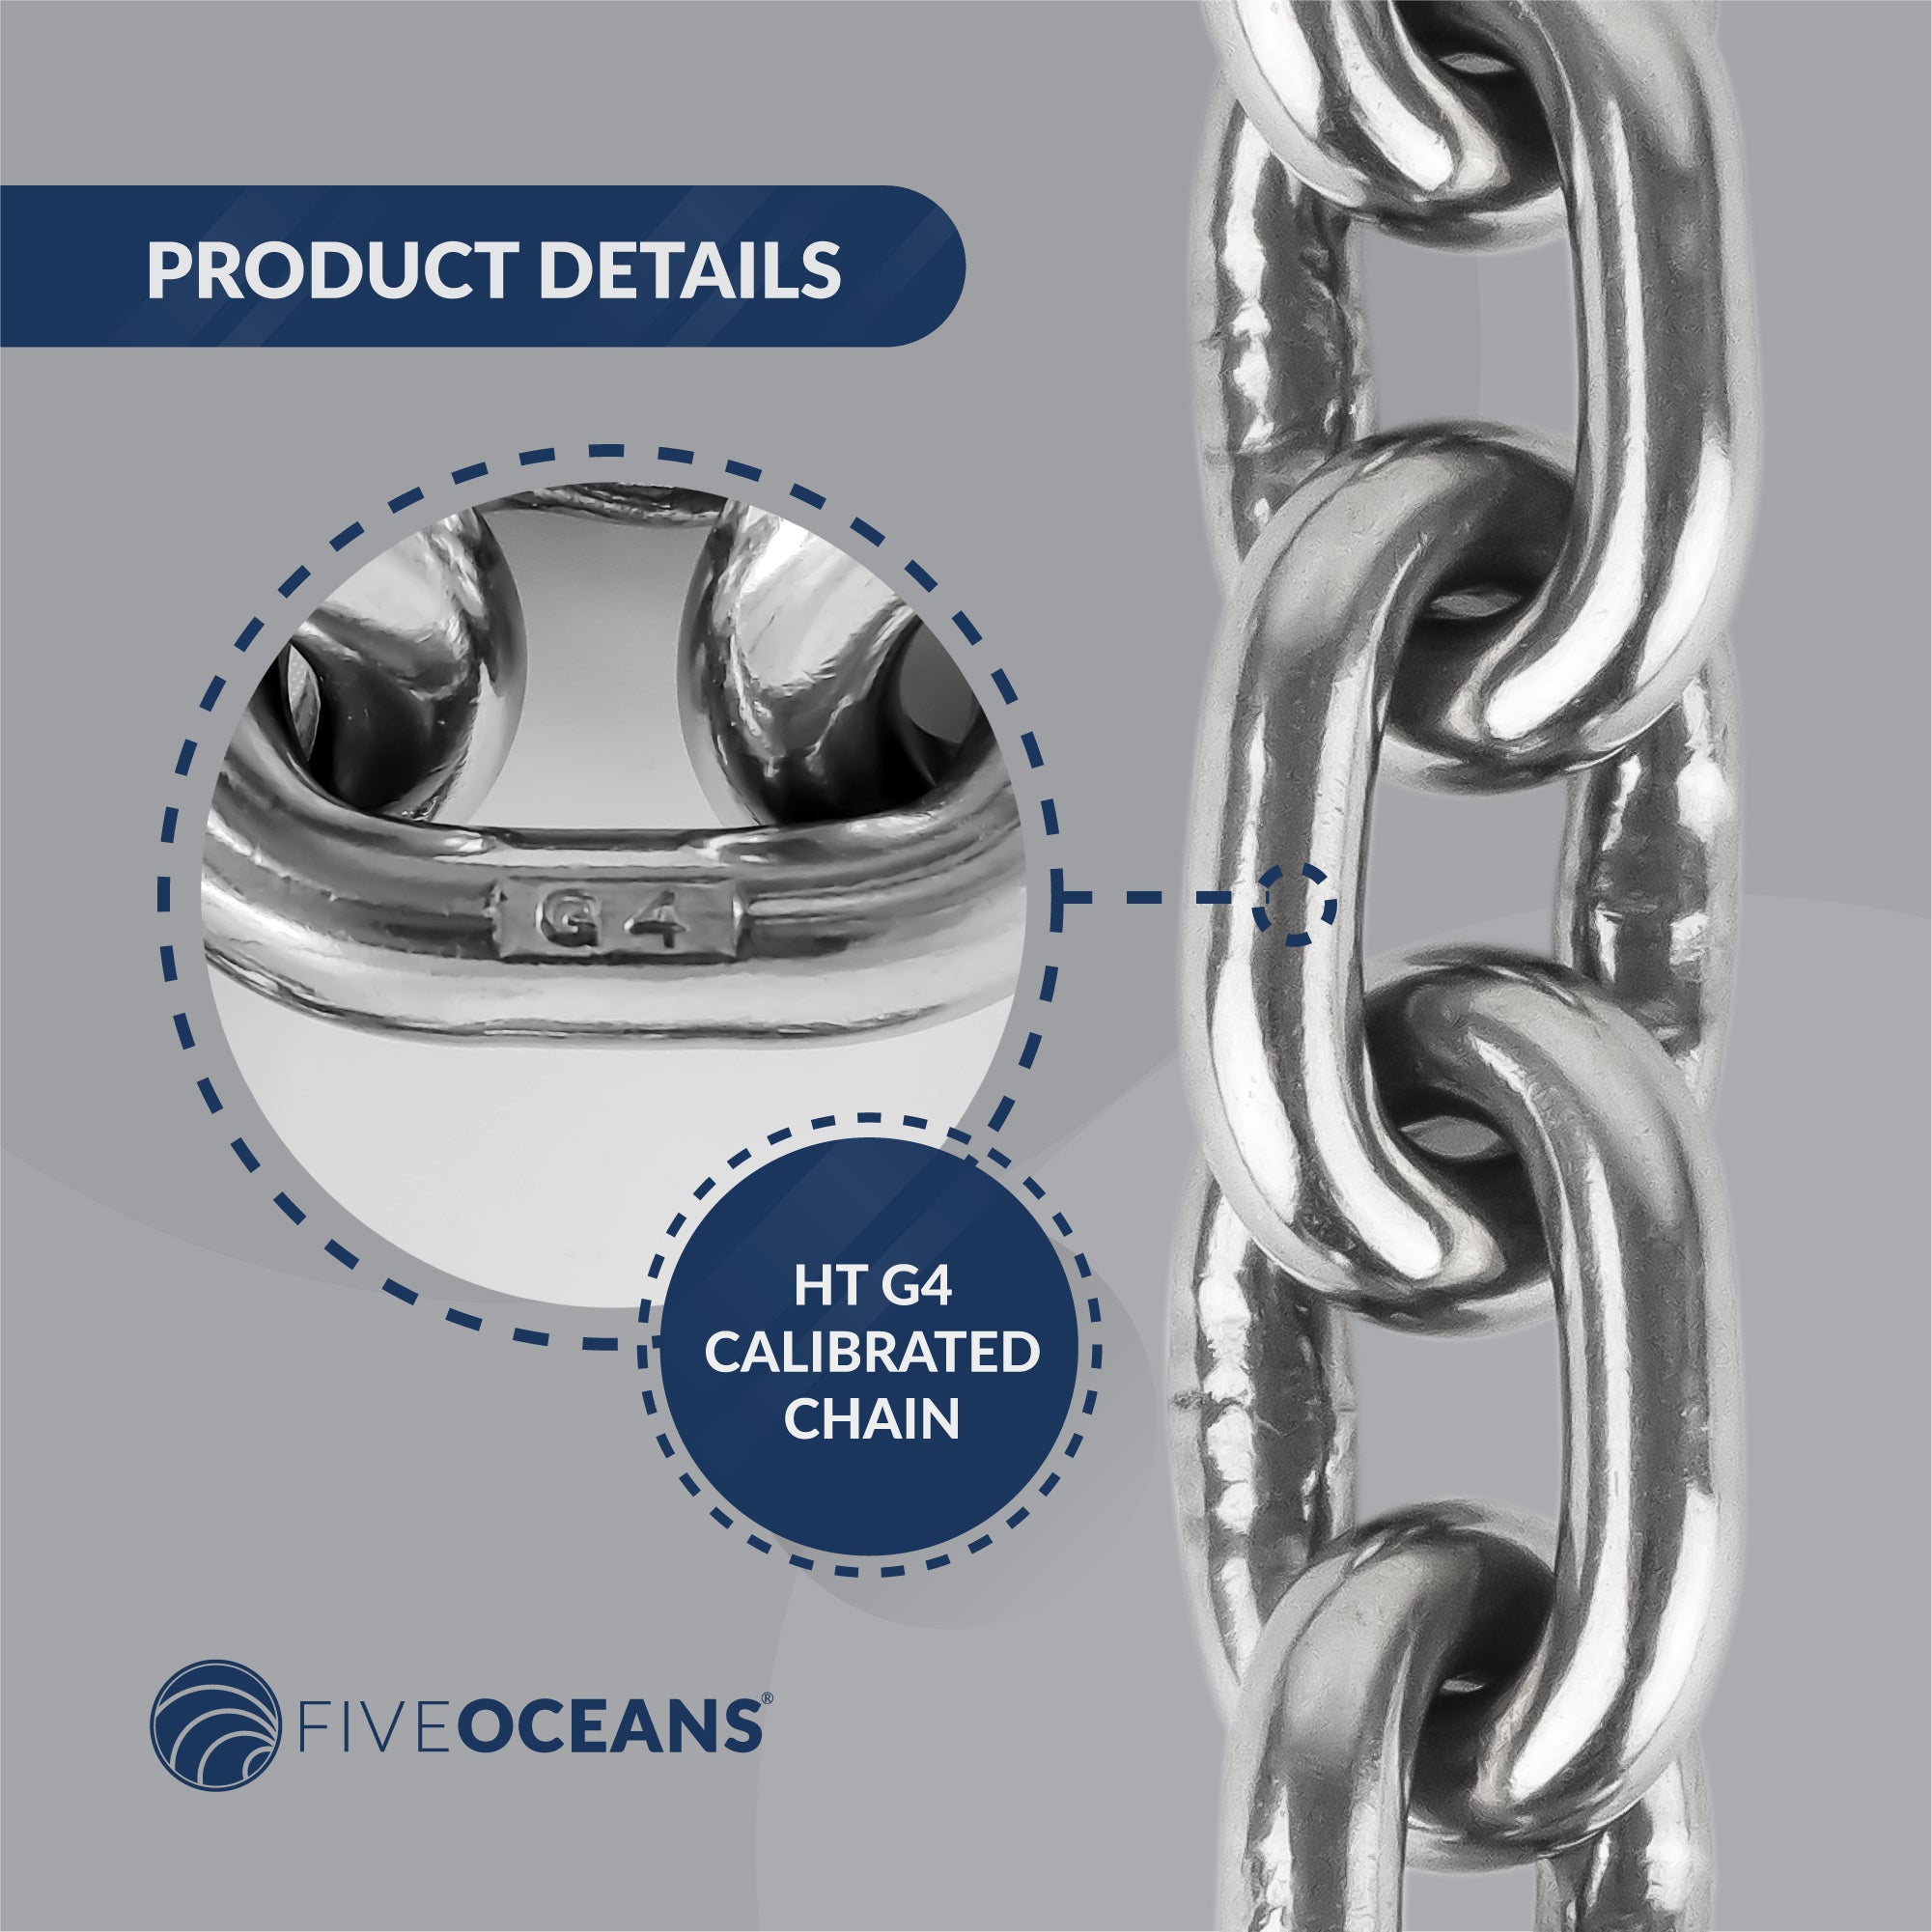 Anchor Lead Chain 3/8" x 10', HTG4 Stainless Steel - FO4494-S10